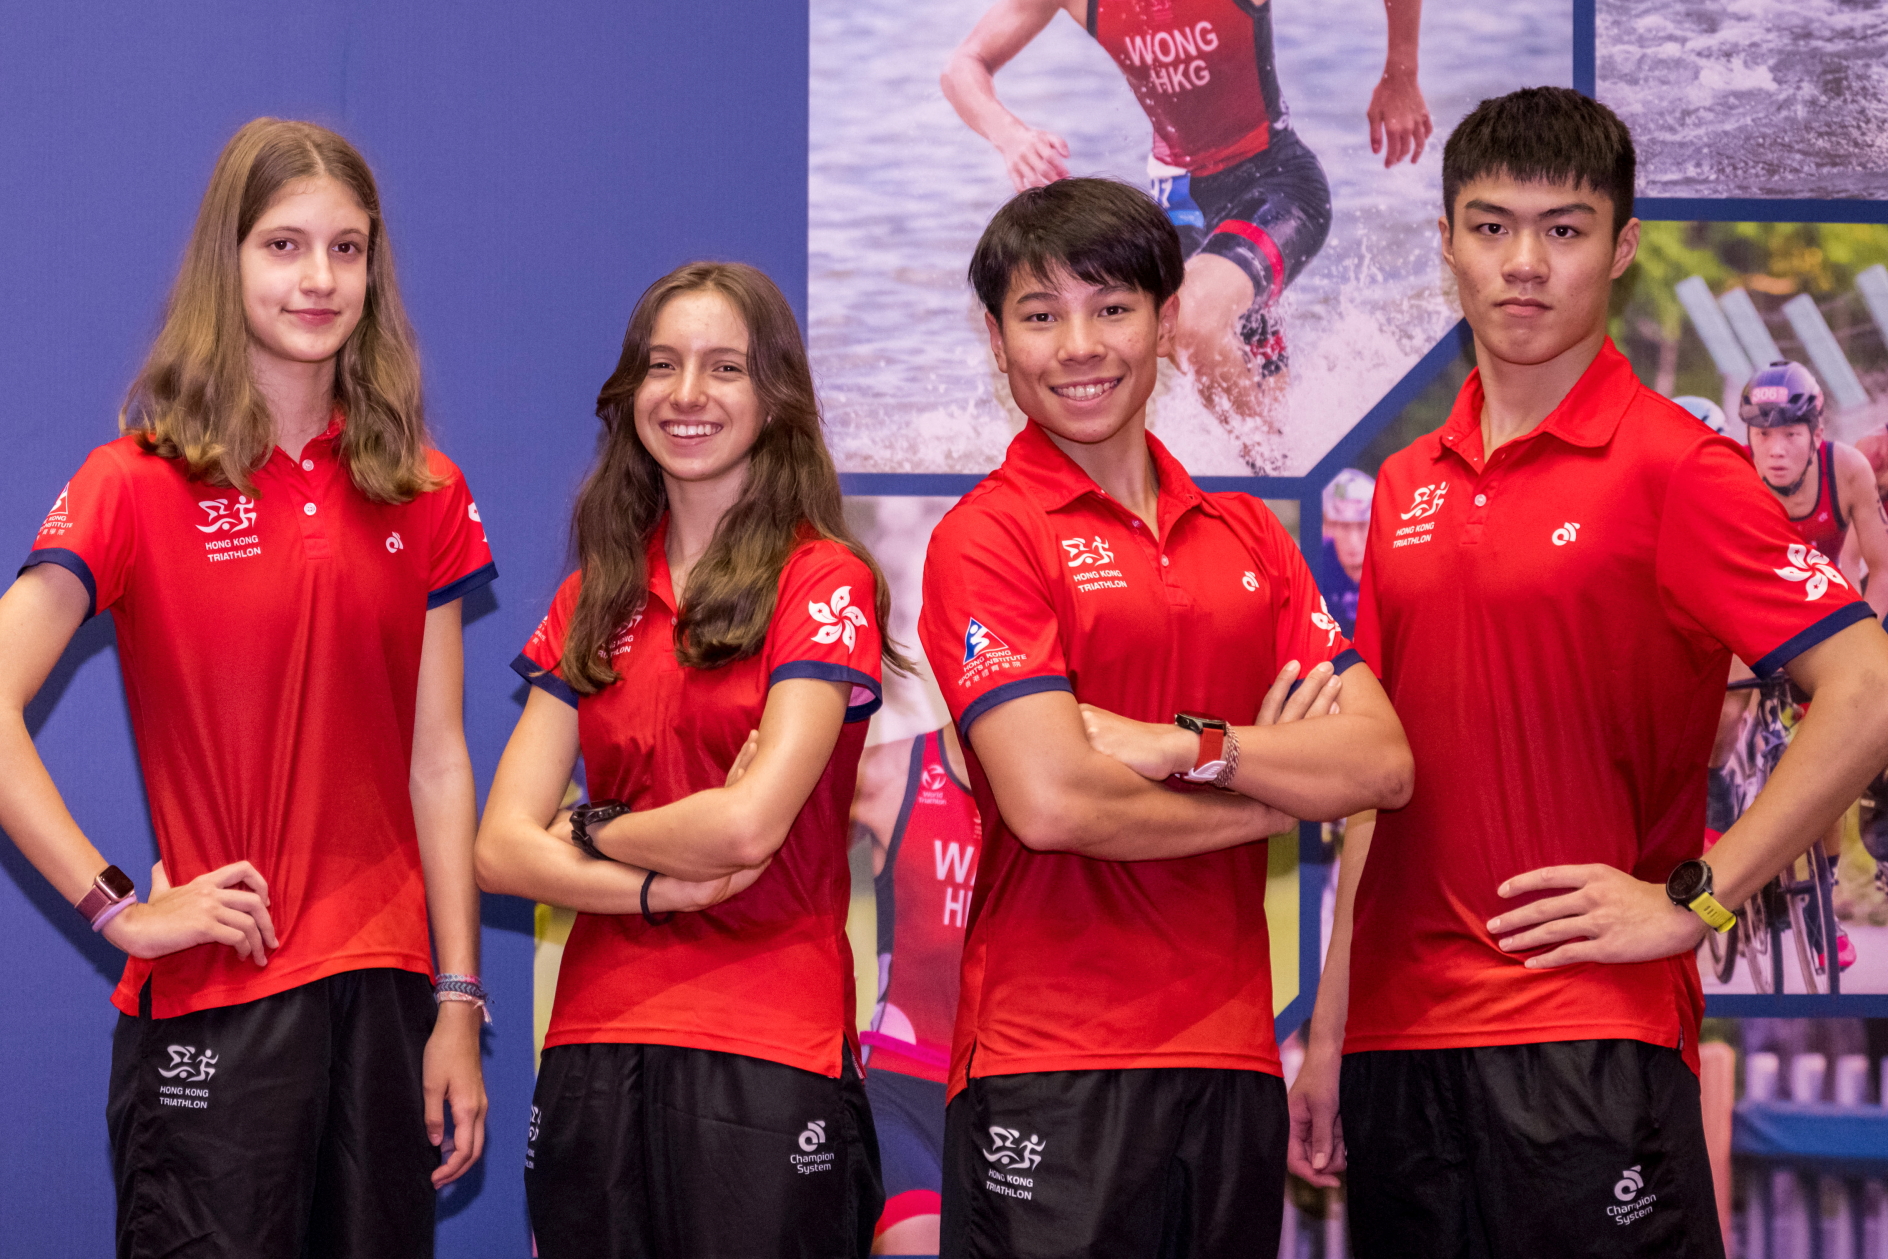 Hong Kong Triathlon National Squad Members (from left): Petra Stamenovic, Pauline Courret, Dominic WT Carson and Chan Yui Fung. Click to enlarge.